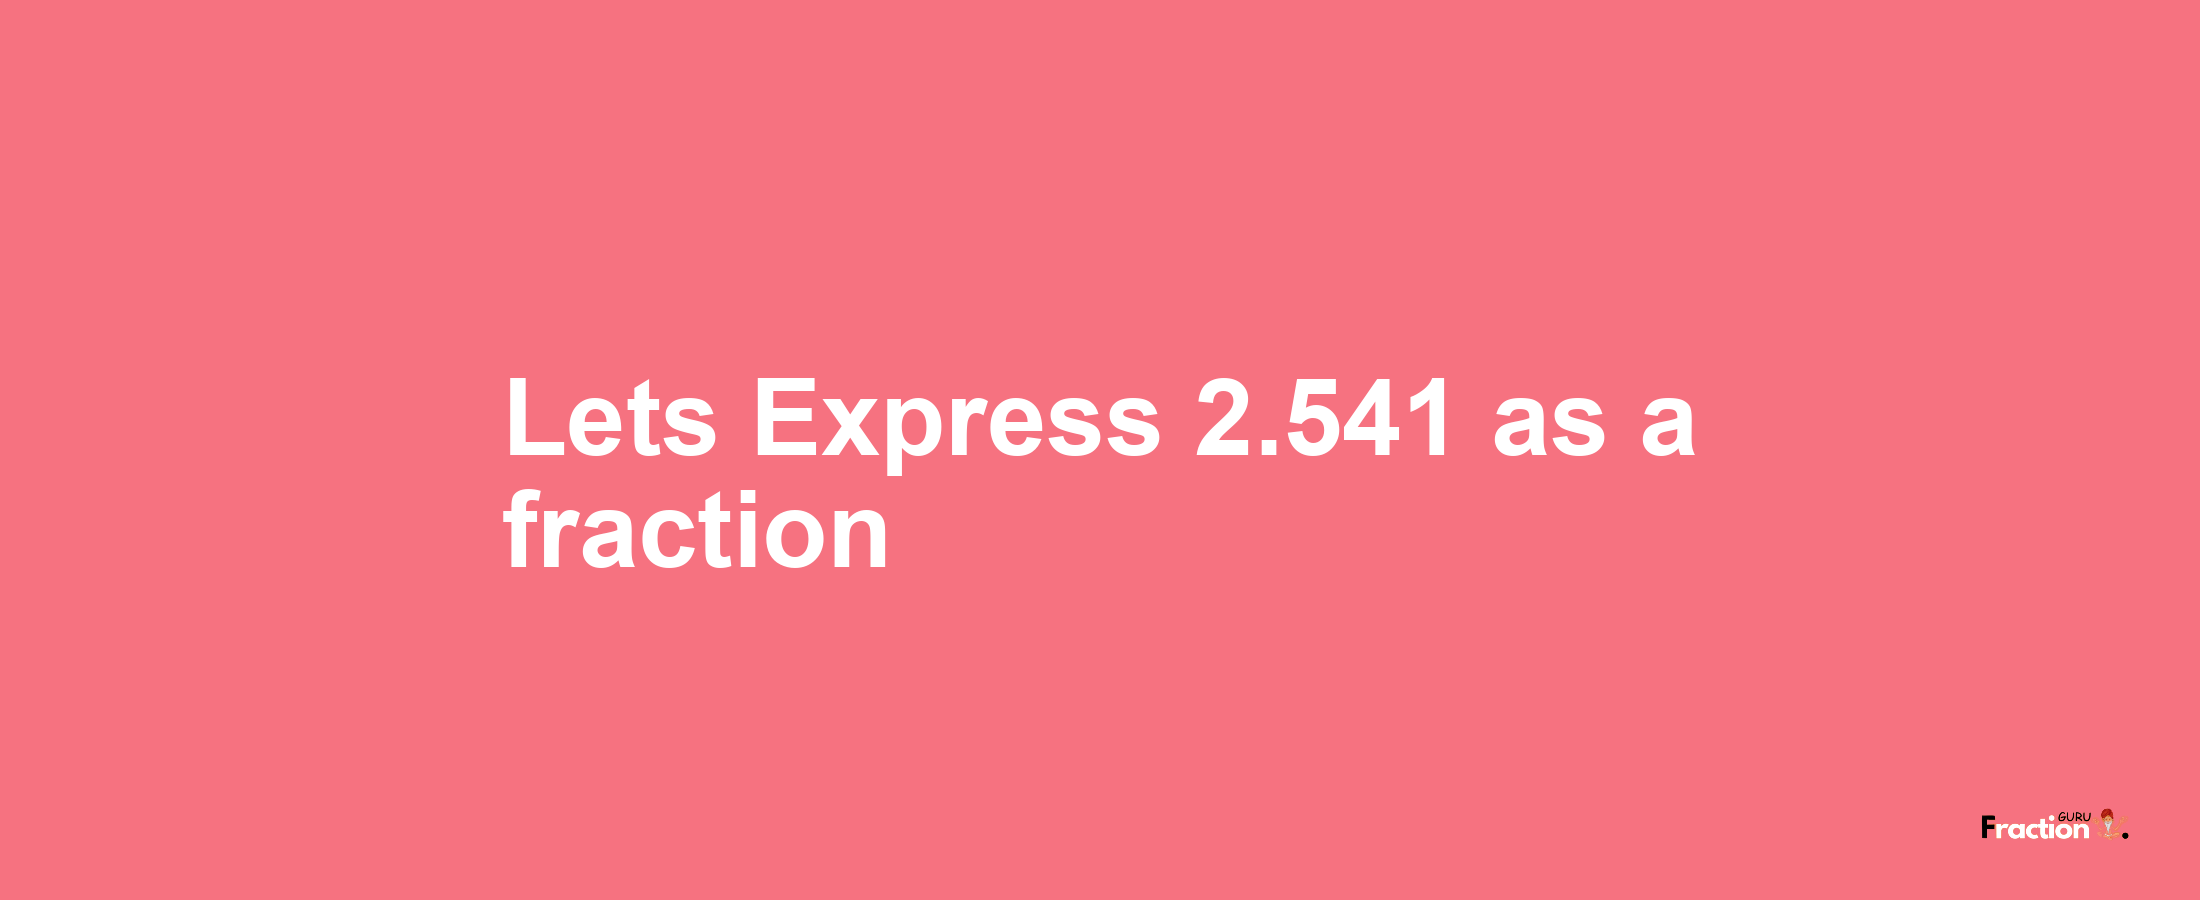 Lets Express 2.541 as afraction